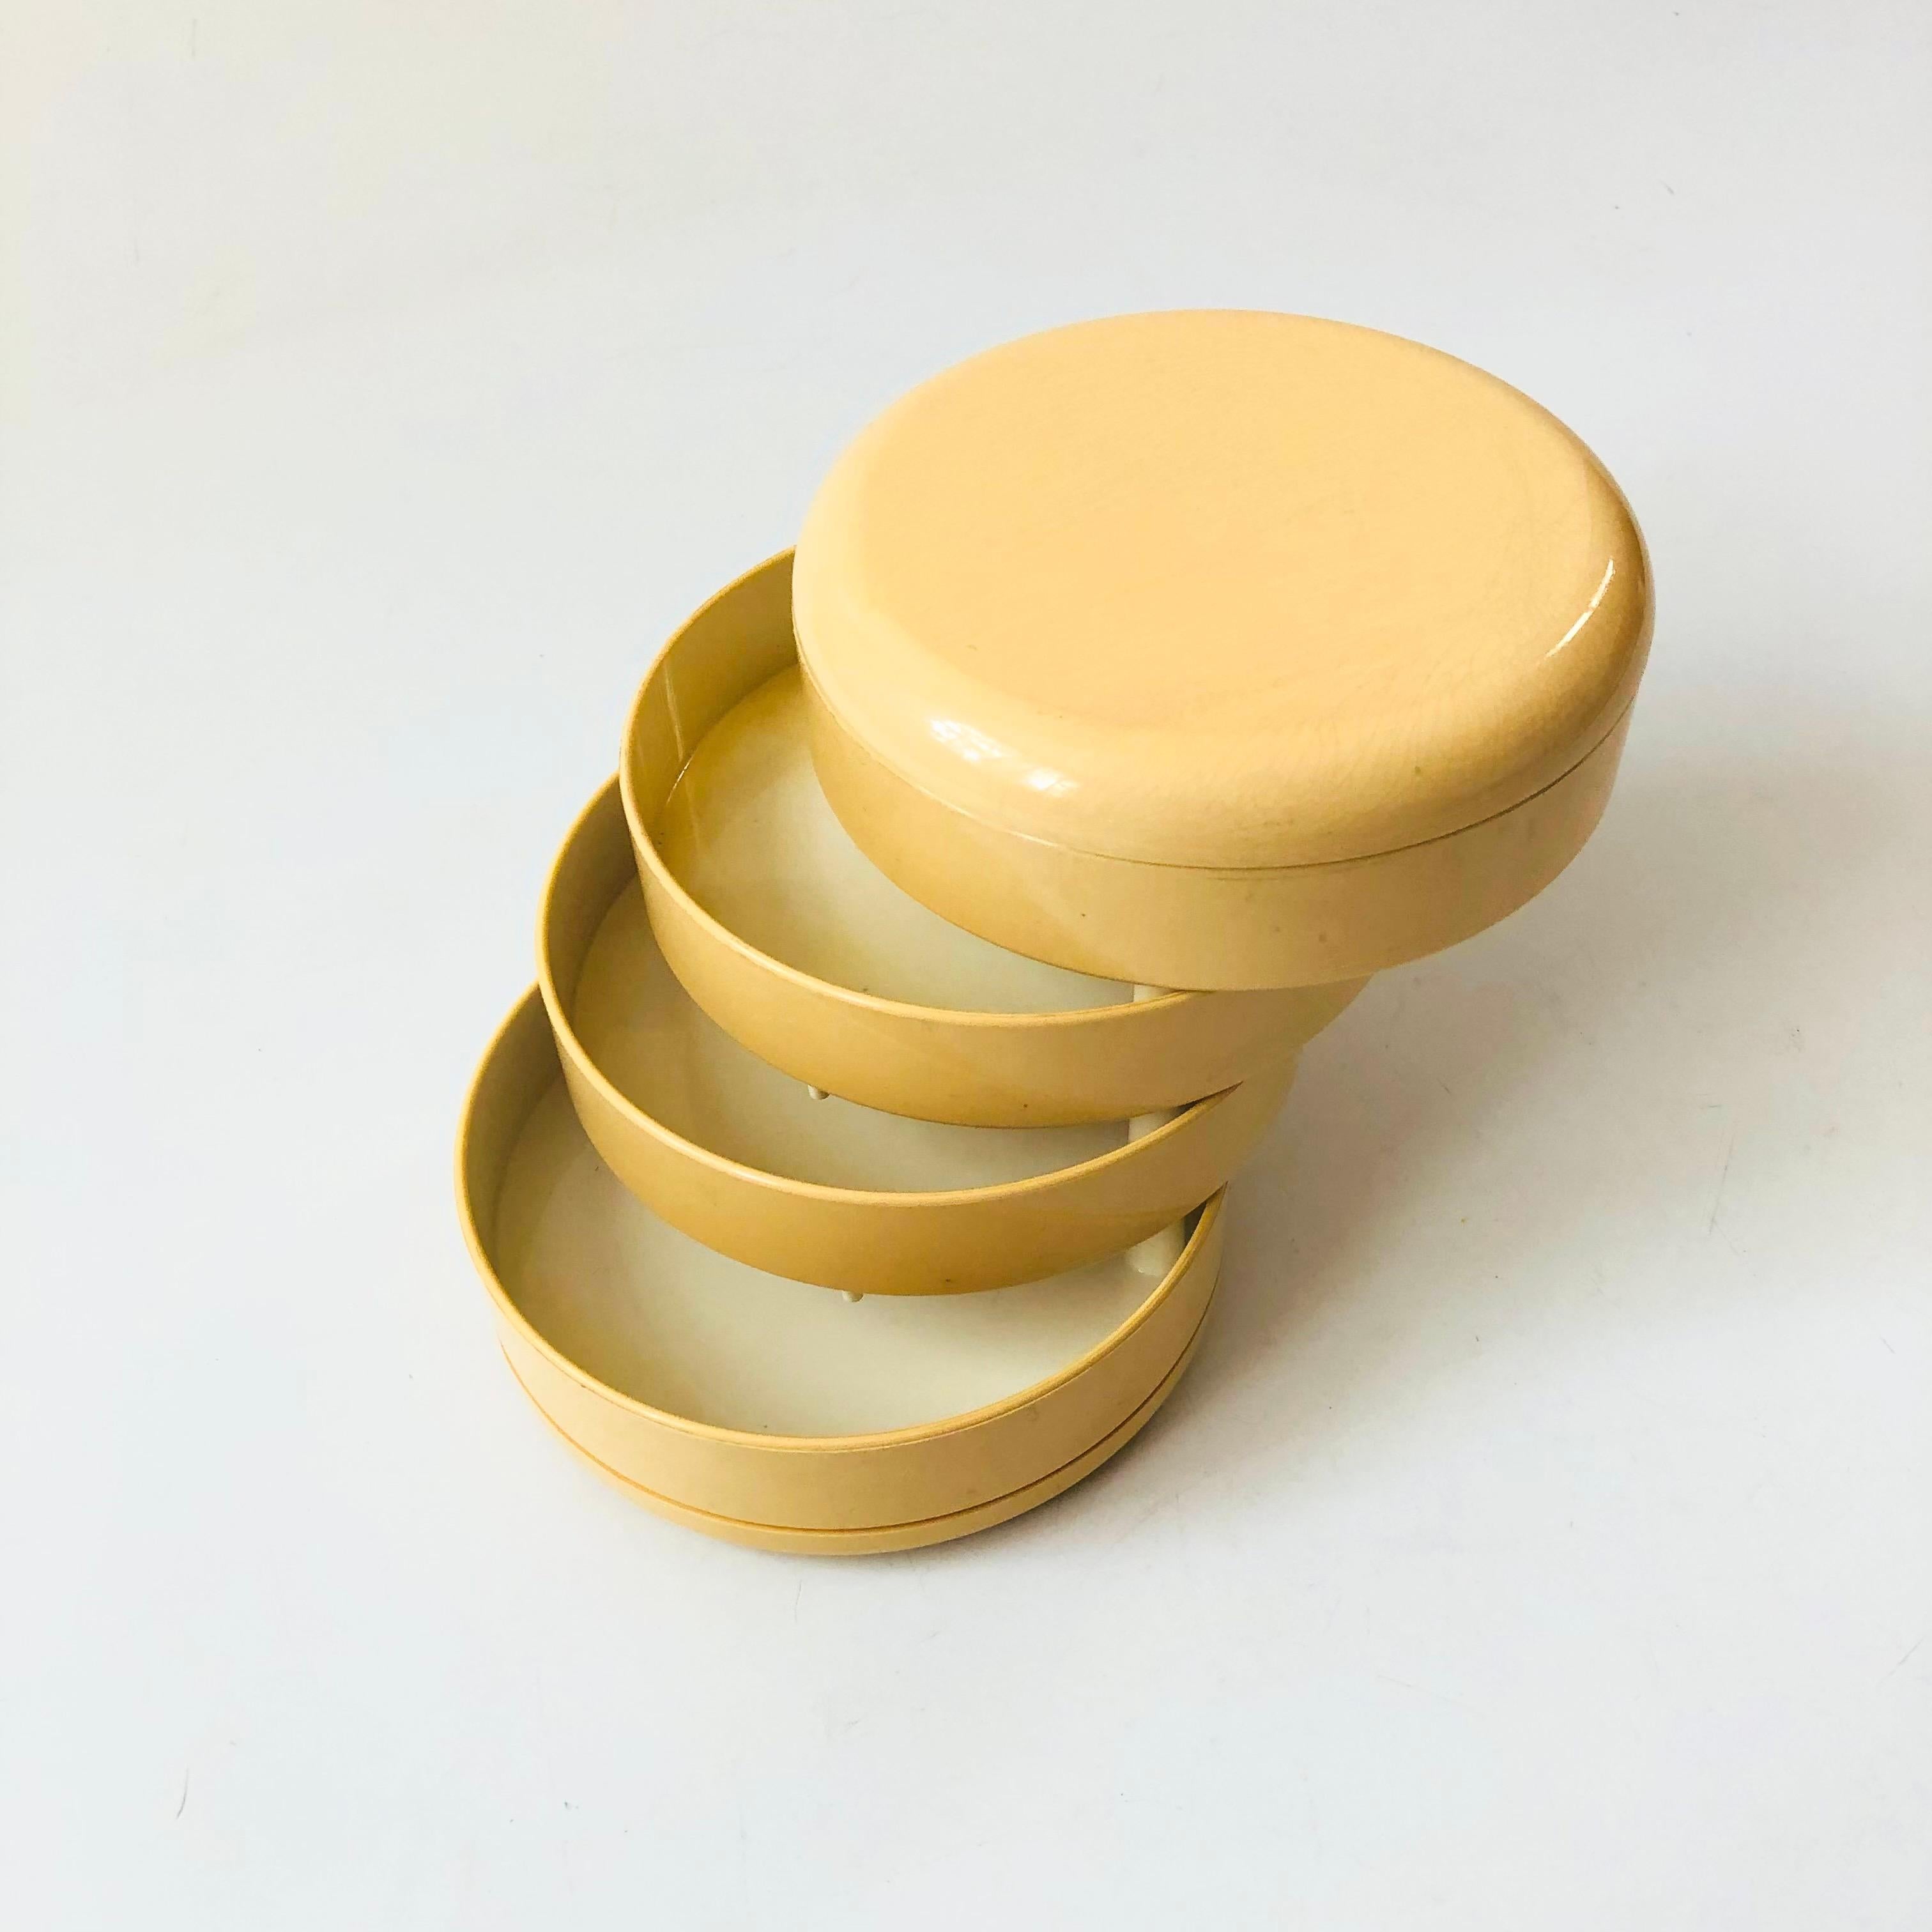 A vintage postmodern circular swivel organizer. 4 storage compartments swivel outwards for accessing small items and with a lidded top. Perfect for organizing desk or bathroom items. Cream colored plastic. Made by Interdesign.

